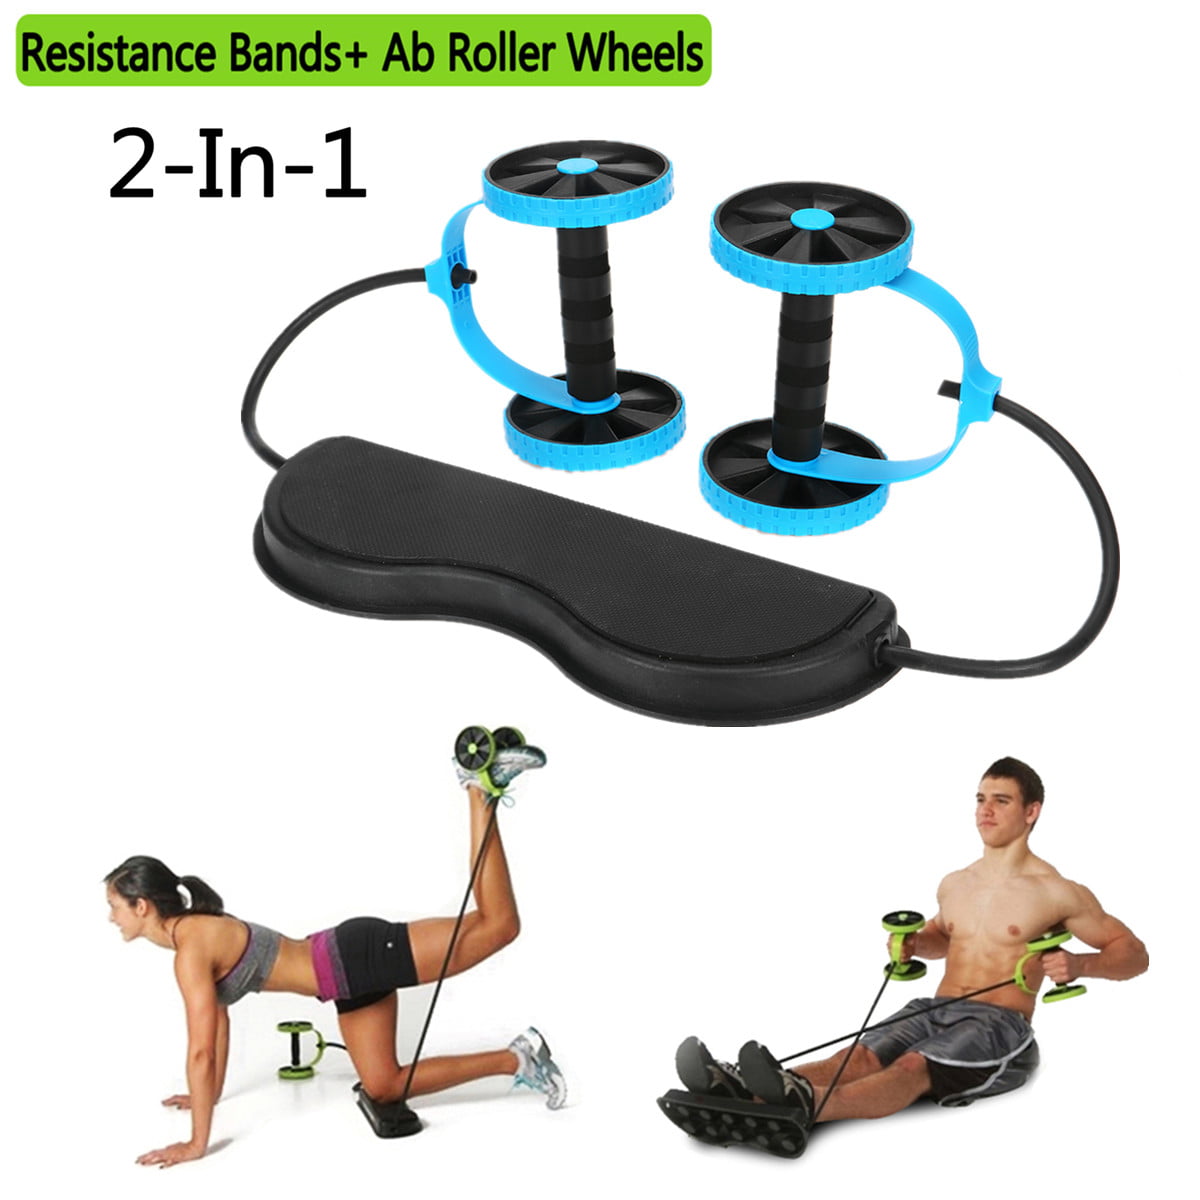 Details about   Domestic Abdominal Power Wheel Roller for Trainer Muscle Roller Workout Exercise 